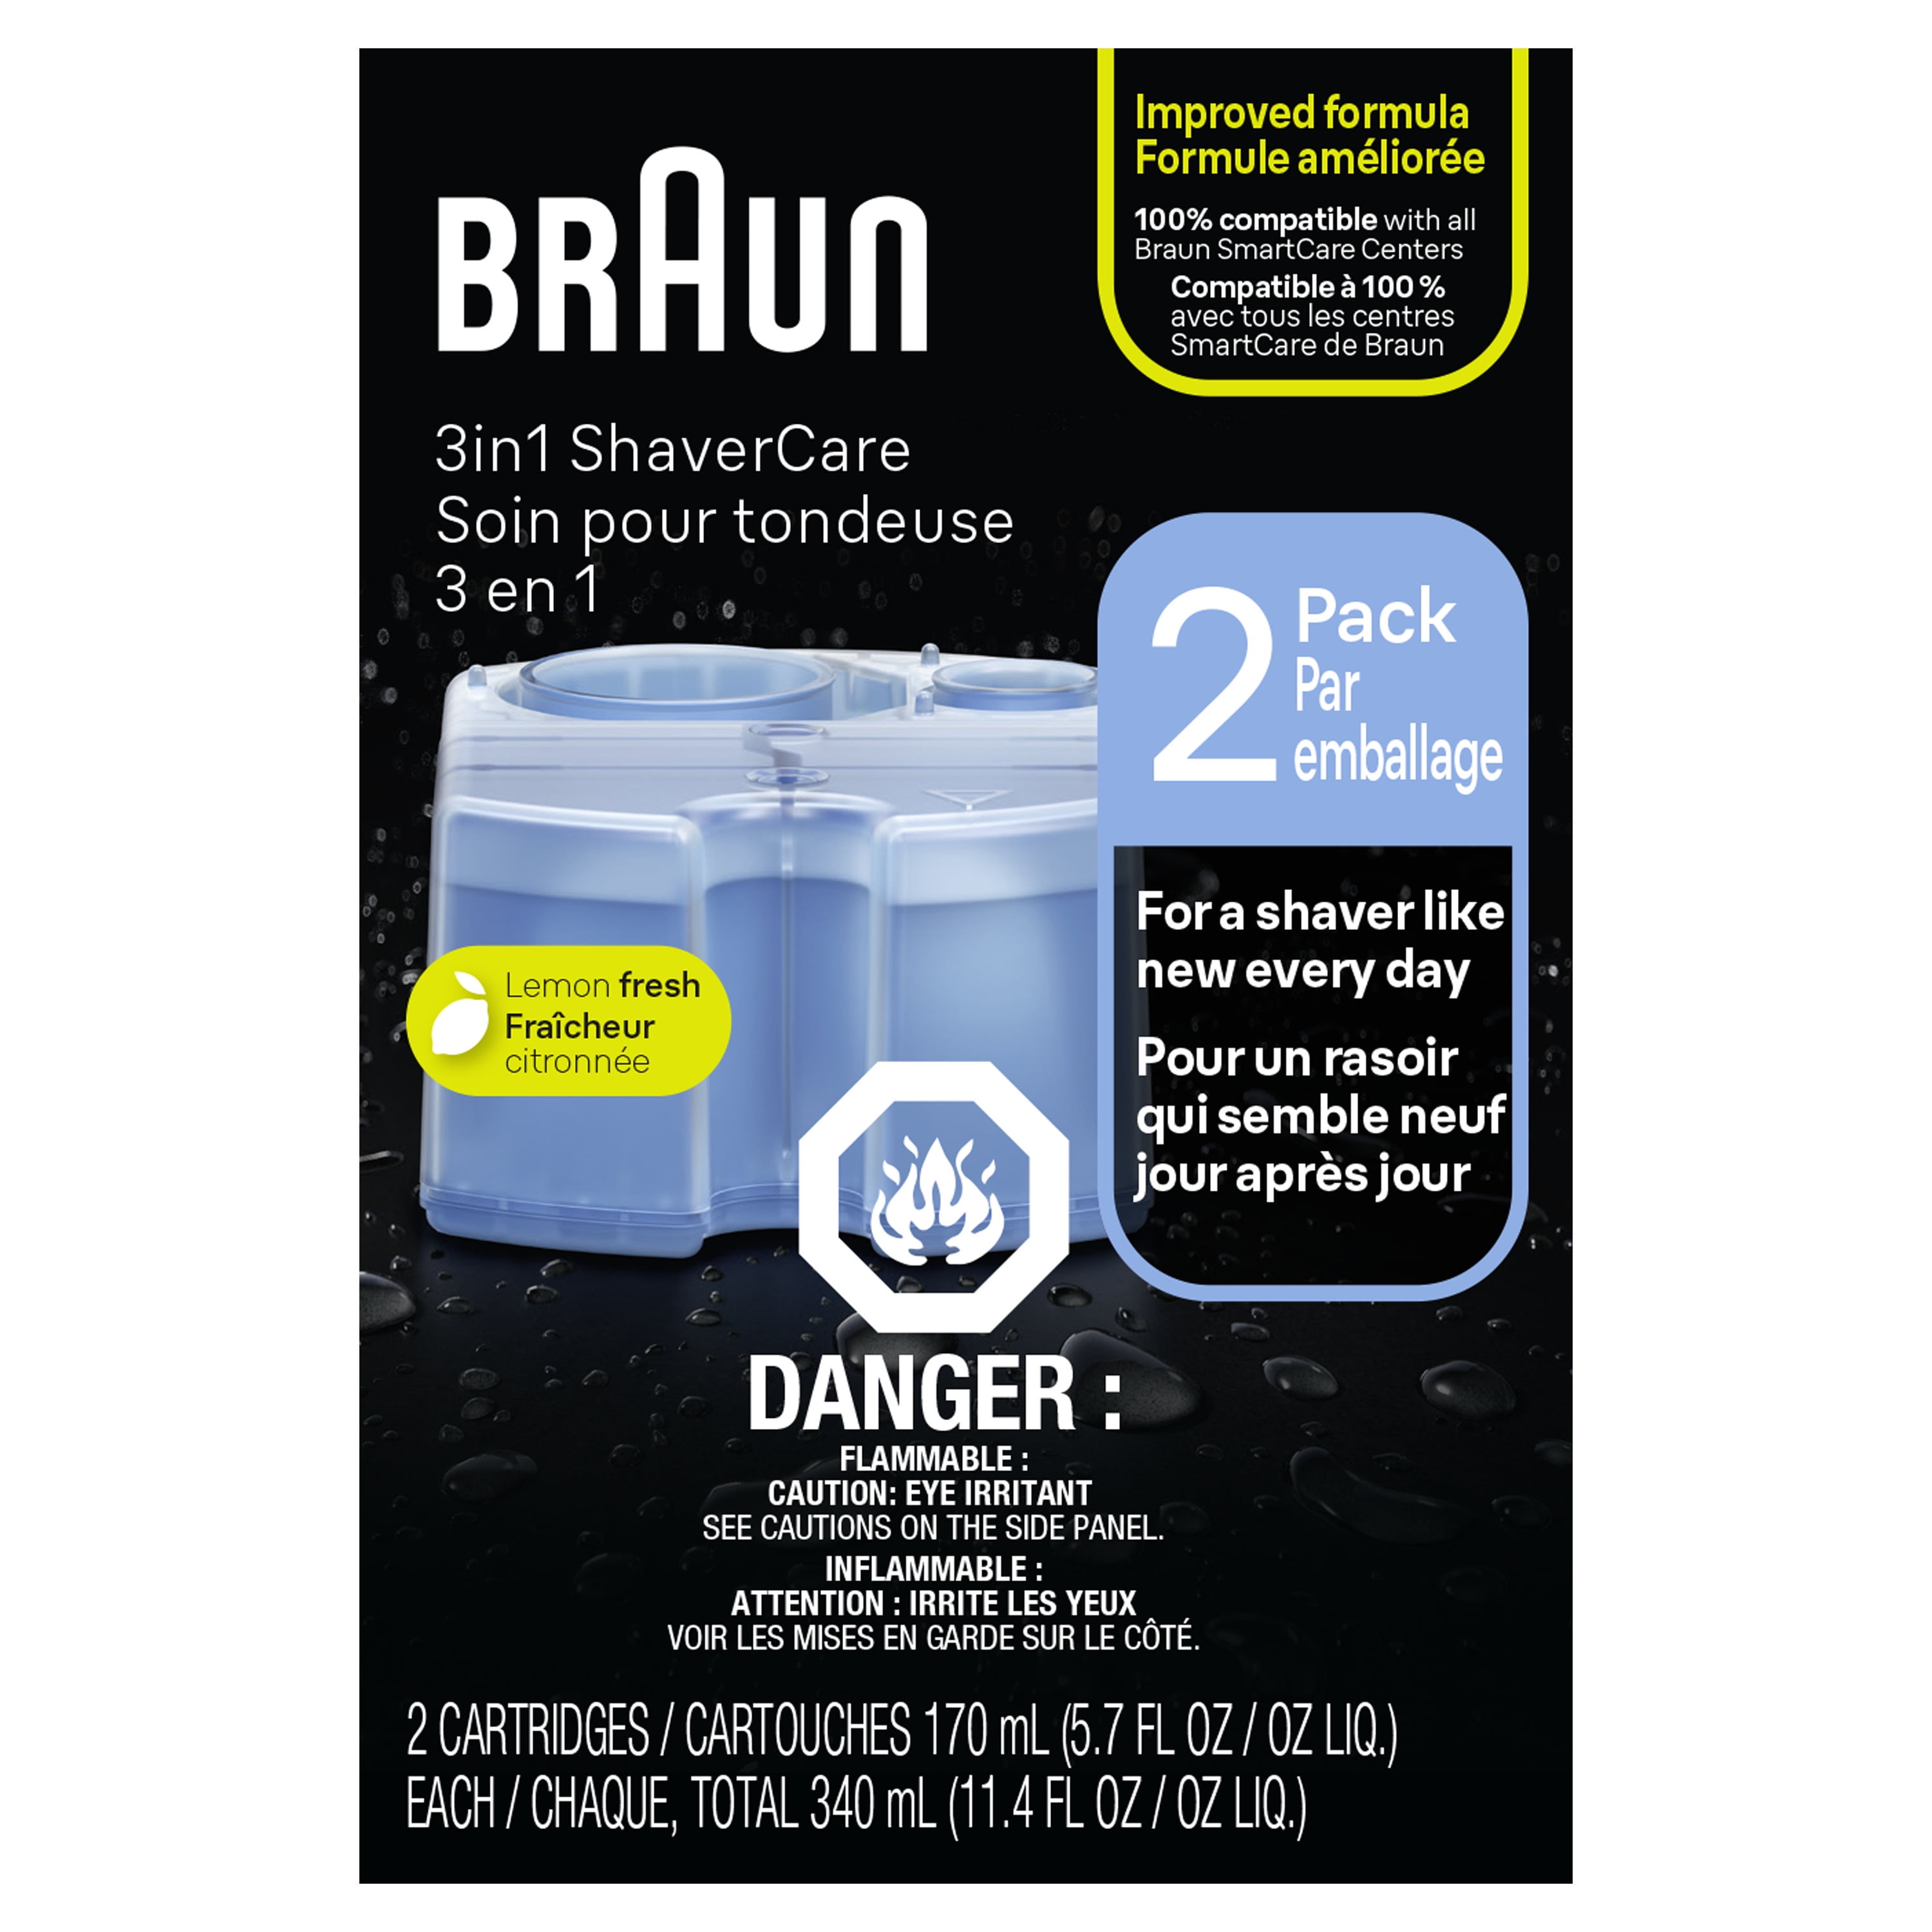 Braun Clean & Renew cleaning cartridges CCR2 (2-Pack) - Germany, New - The  wholesale platform